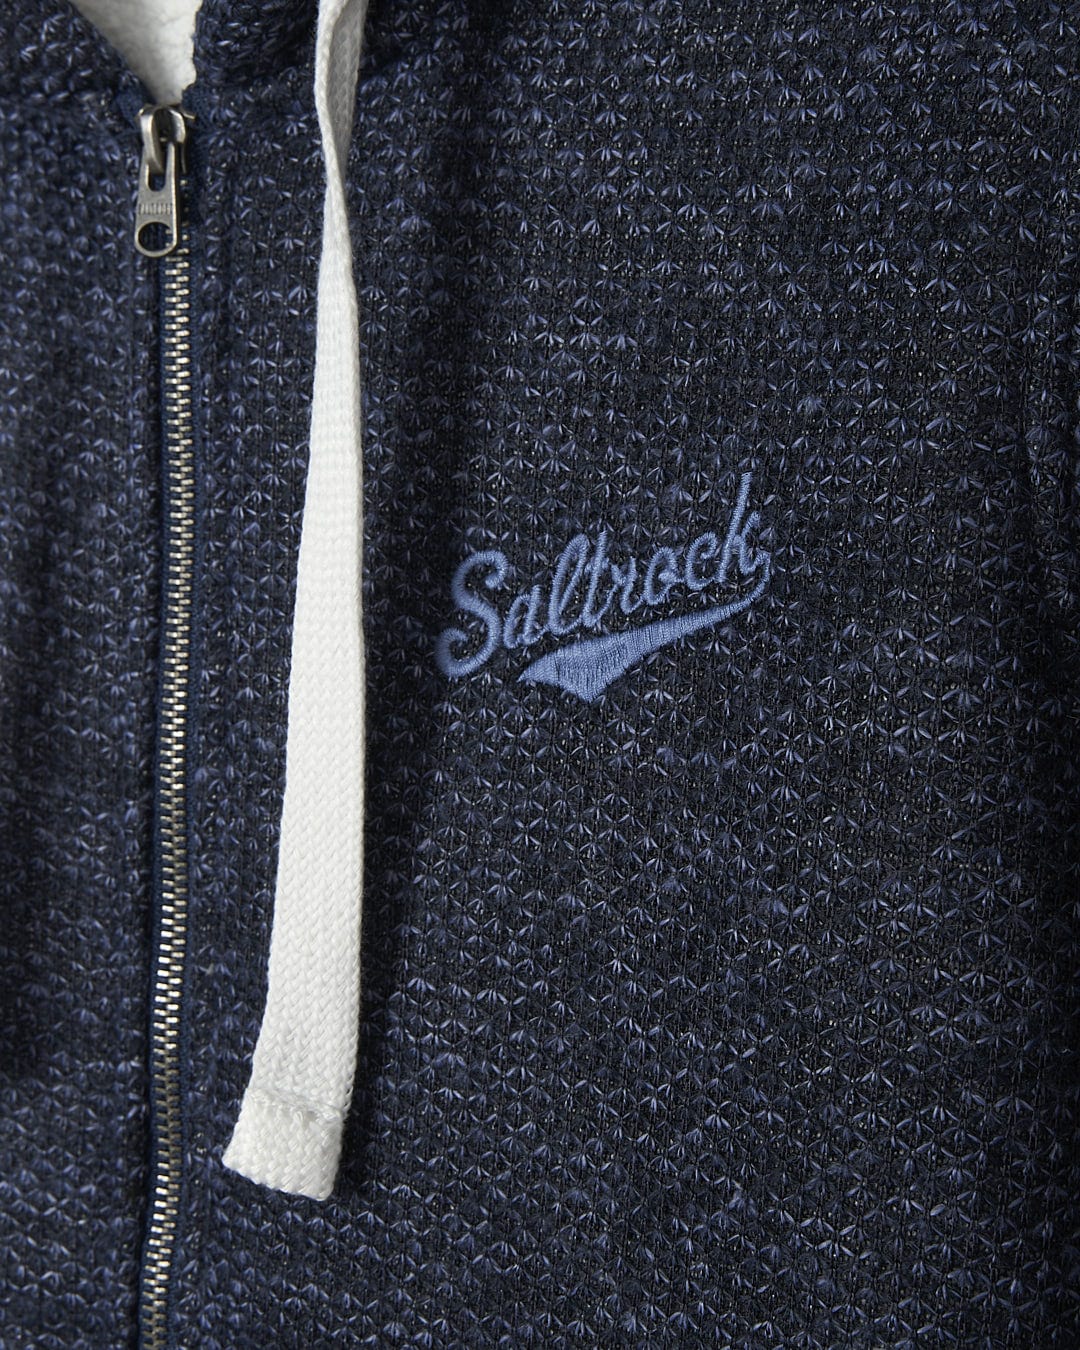 A Jazz - Womens Borg Lined Zip Hoodie - Dark Blue with the brand name Saltrock on it.